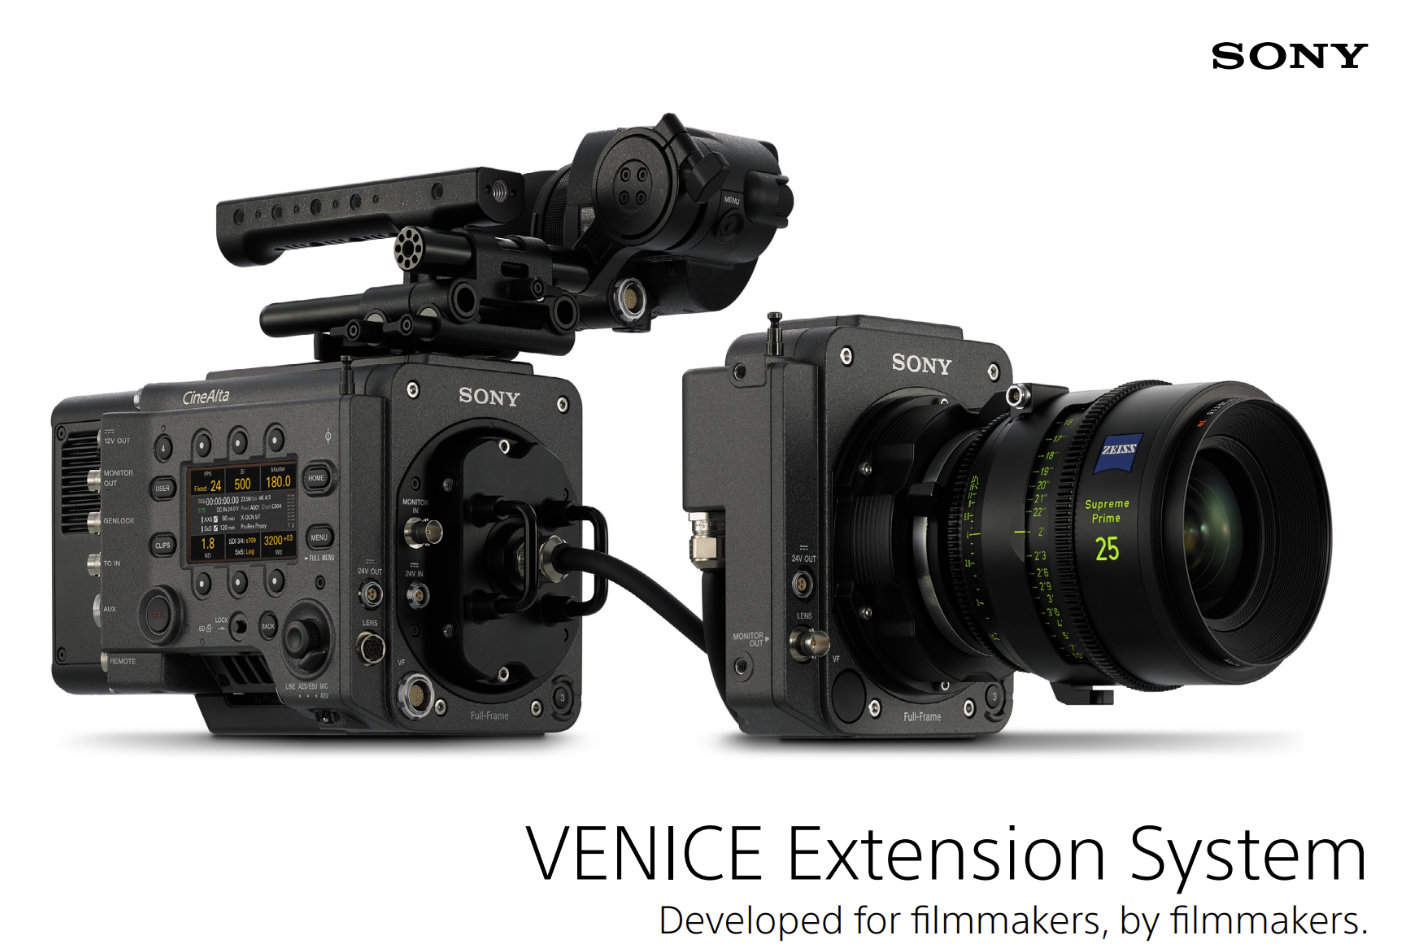 Sony BURANO CineAlta: is this VENICE’s little sister?